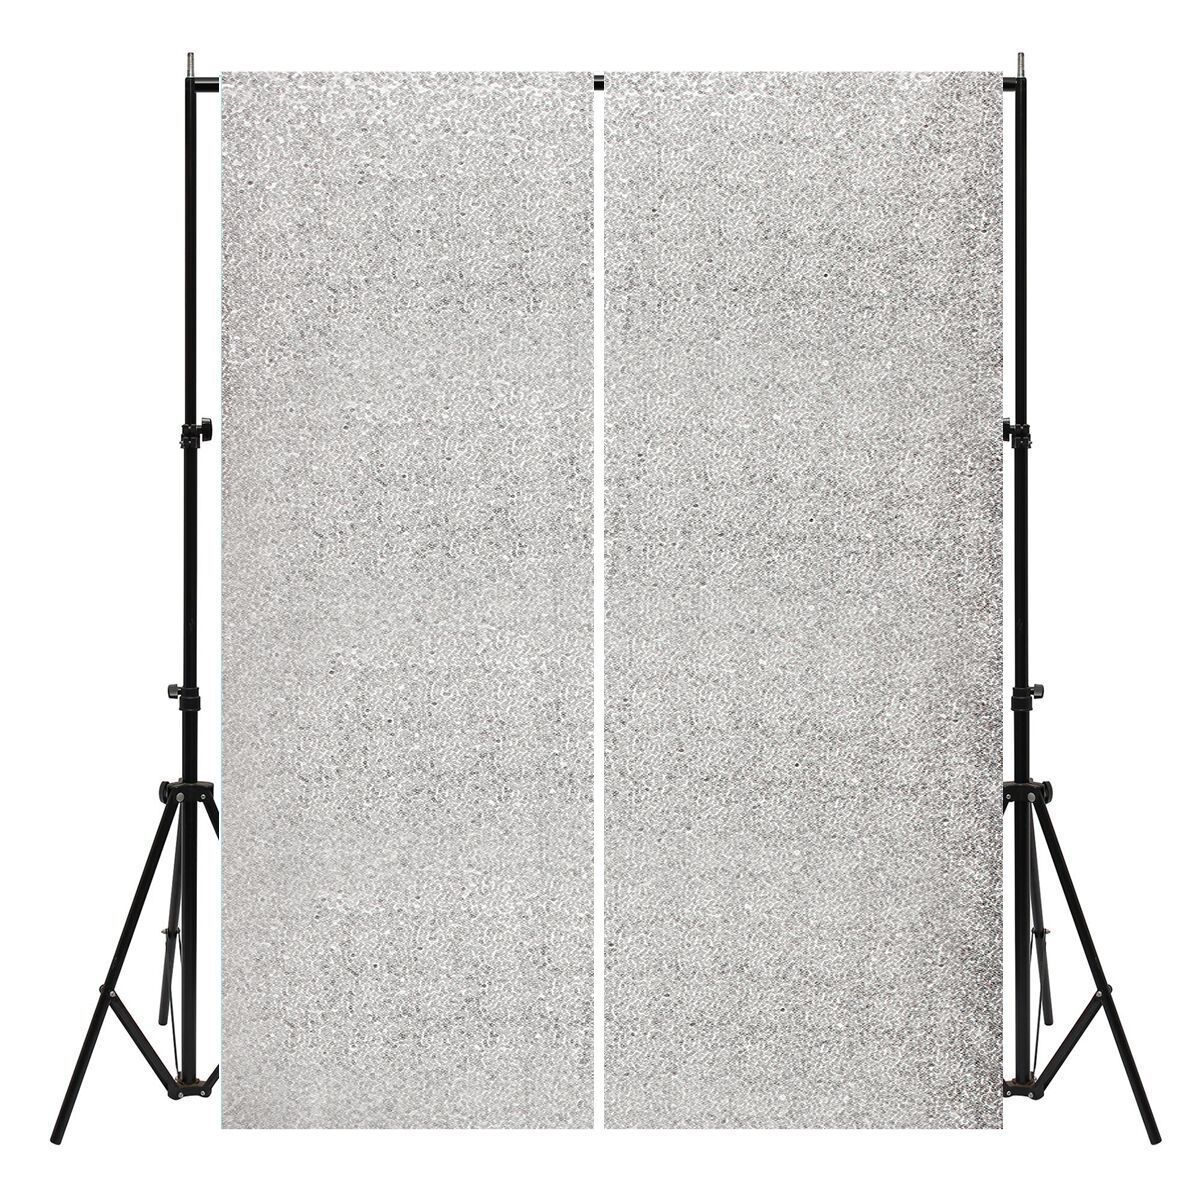 2-Panels-2FTX7FT-Silver-Shimmer-Sequins-Fabric-Wedding-Photography-Backdrop-1160118